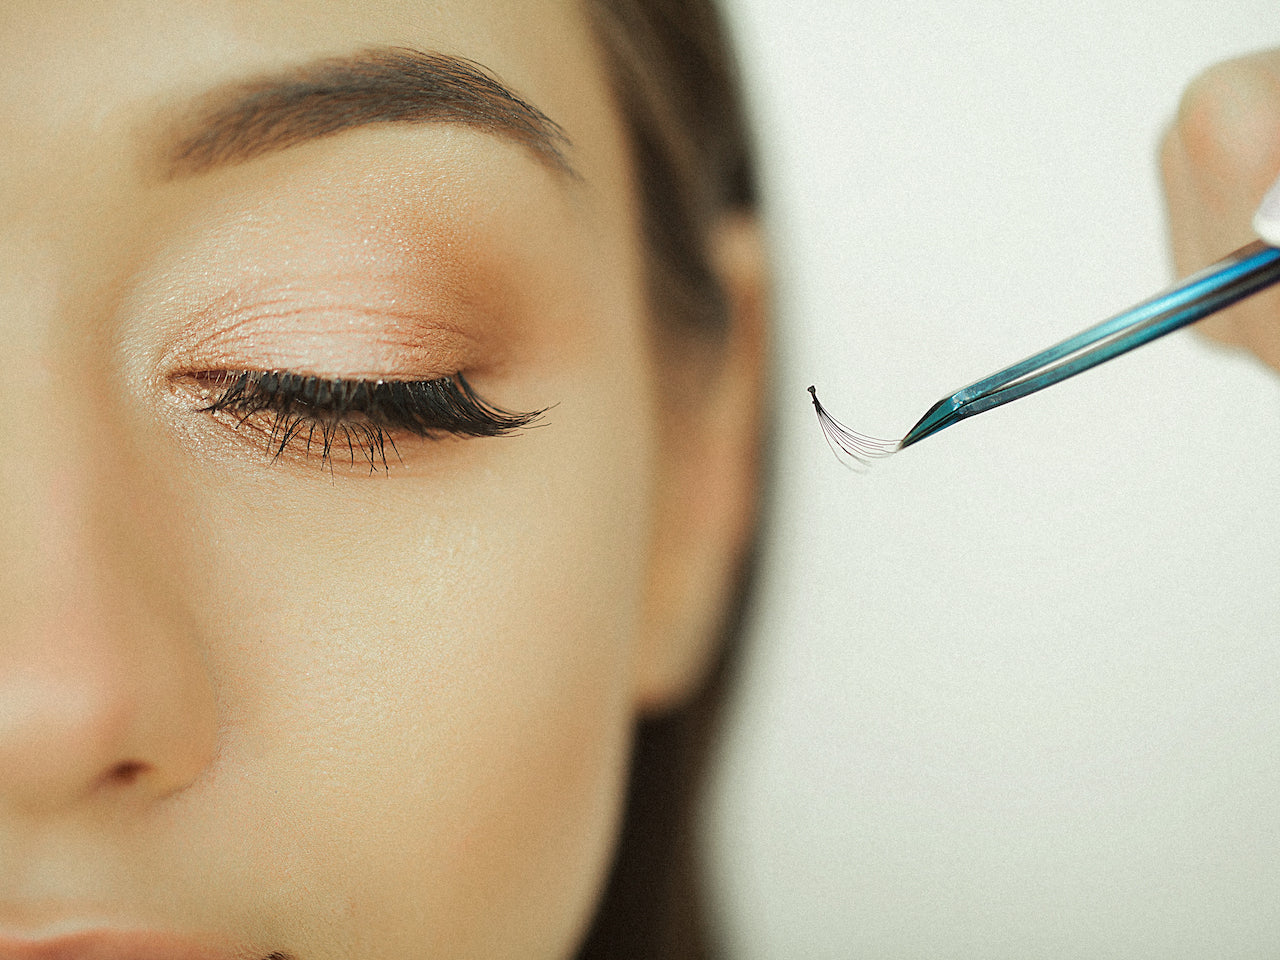 How I Grew my Eyelash Extension Business by Caring more about People